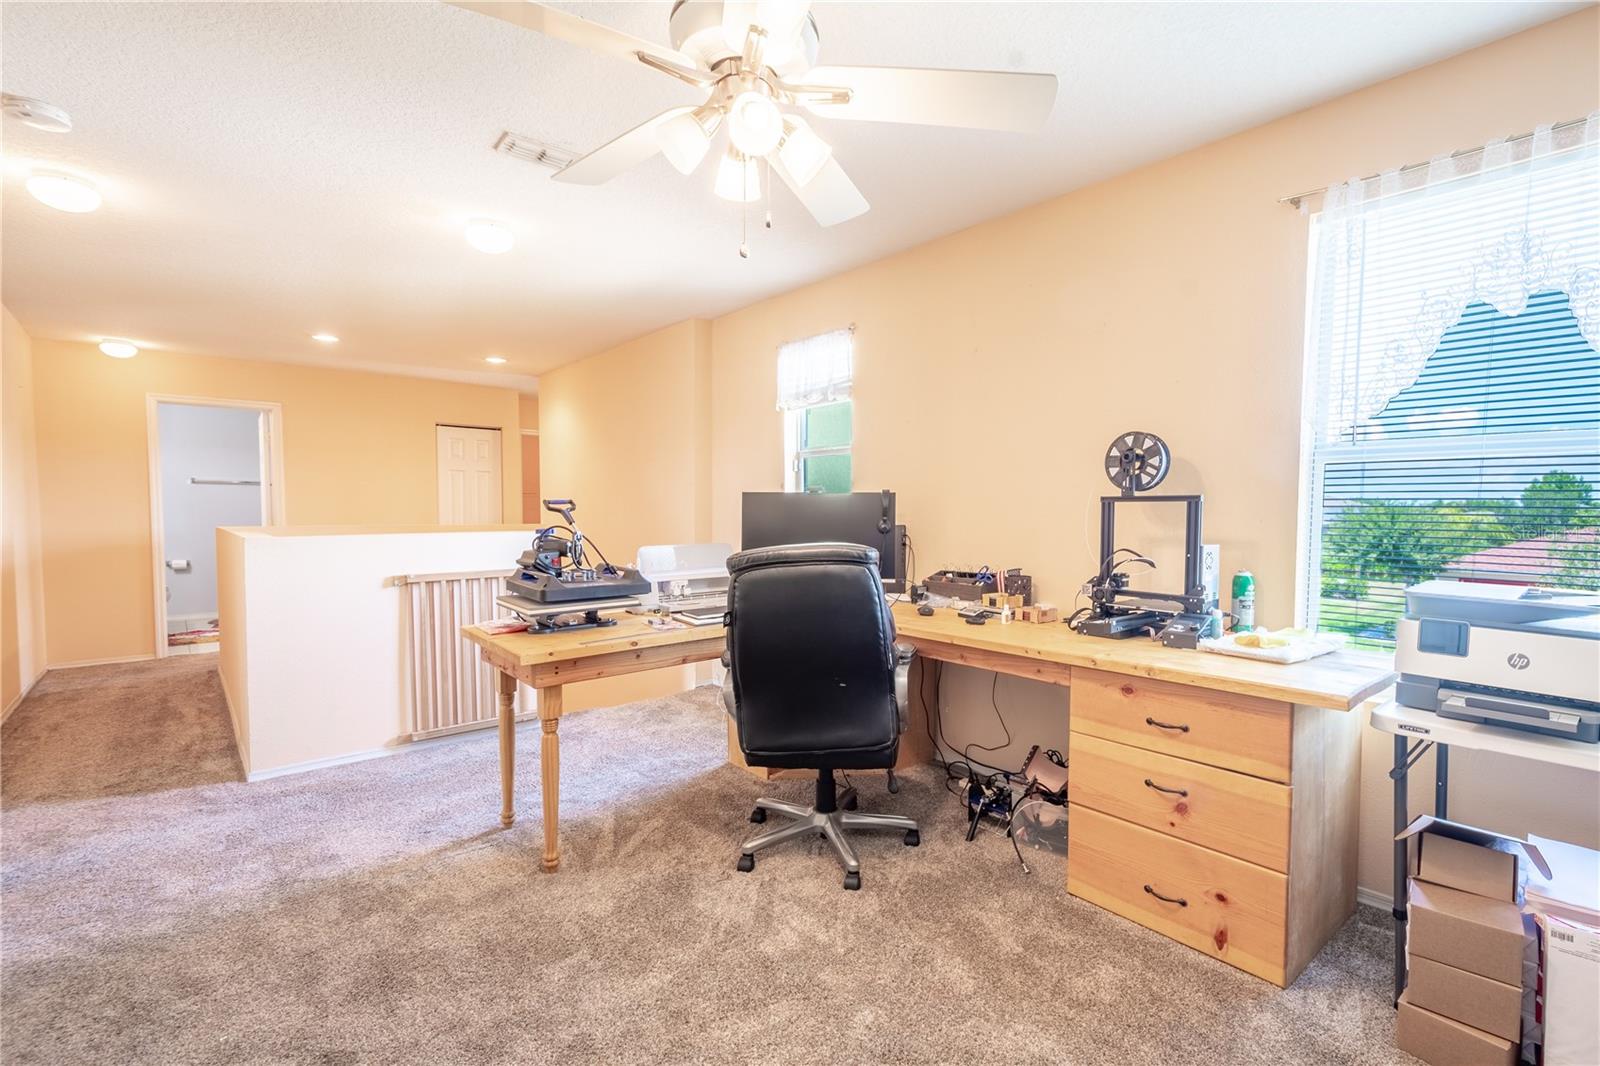 The upstairs loft is ideal for an office, a TV or game room, or playroom.